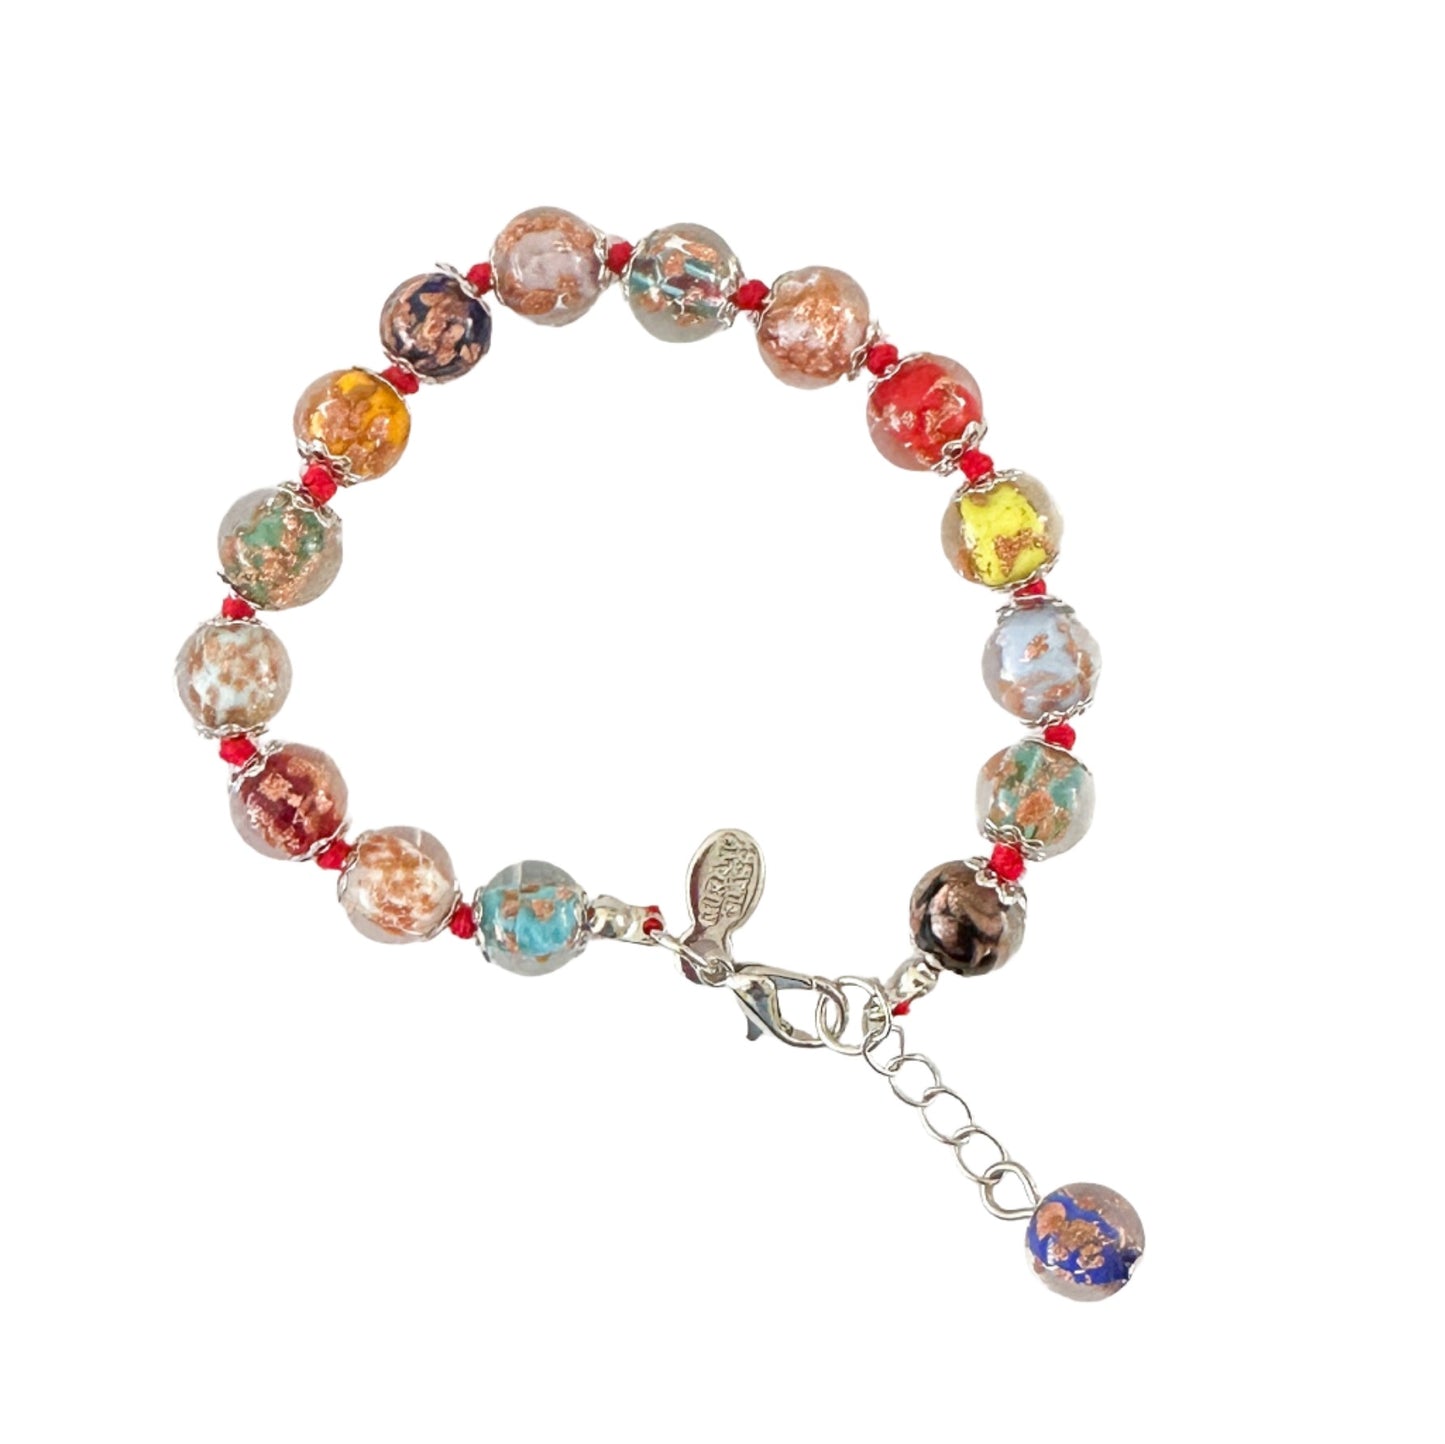 Murano glass bead bracelet with silver findings